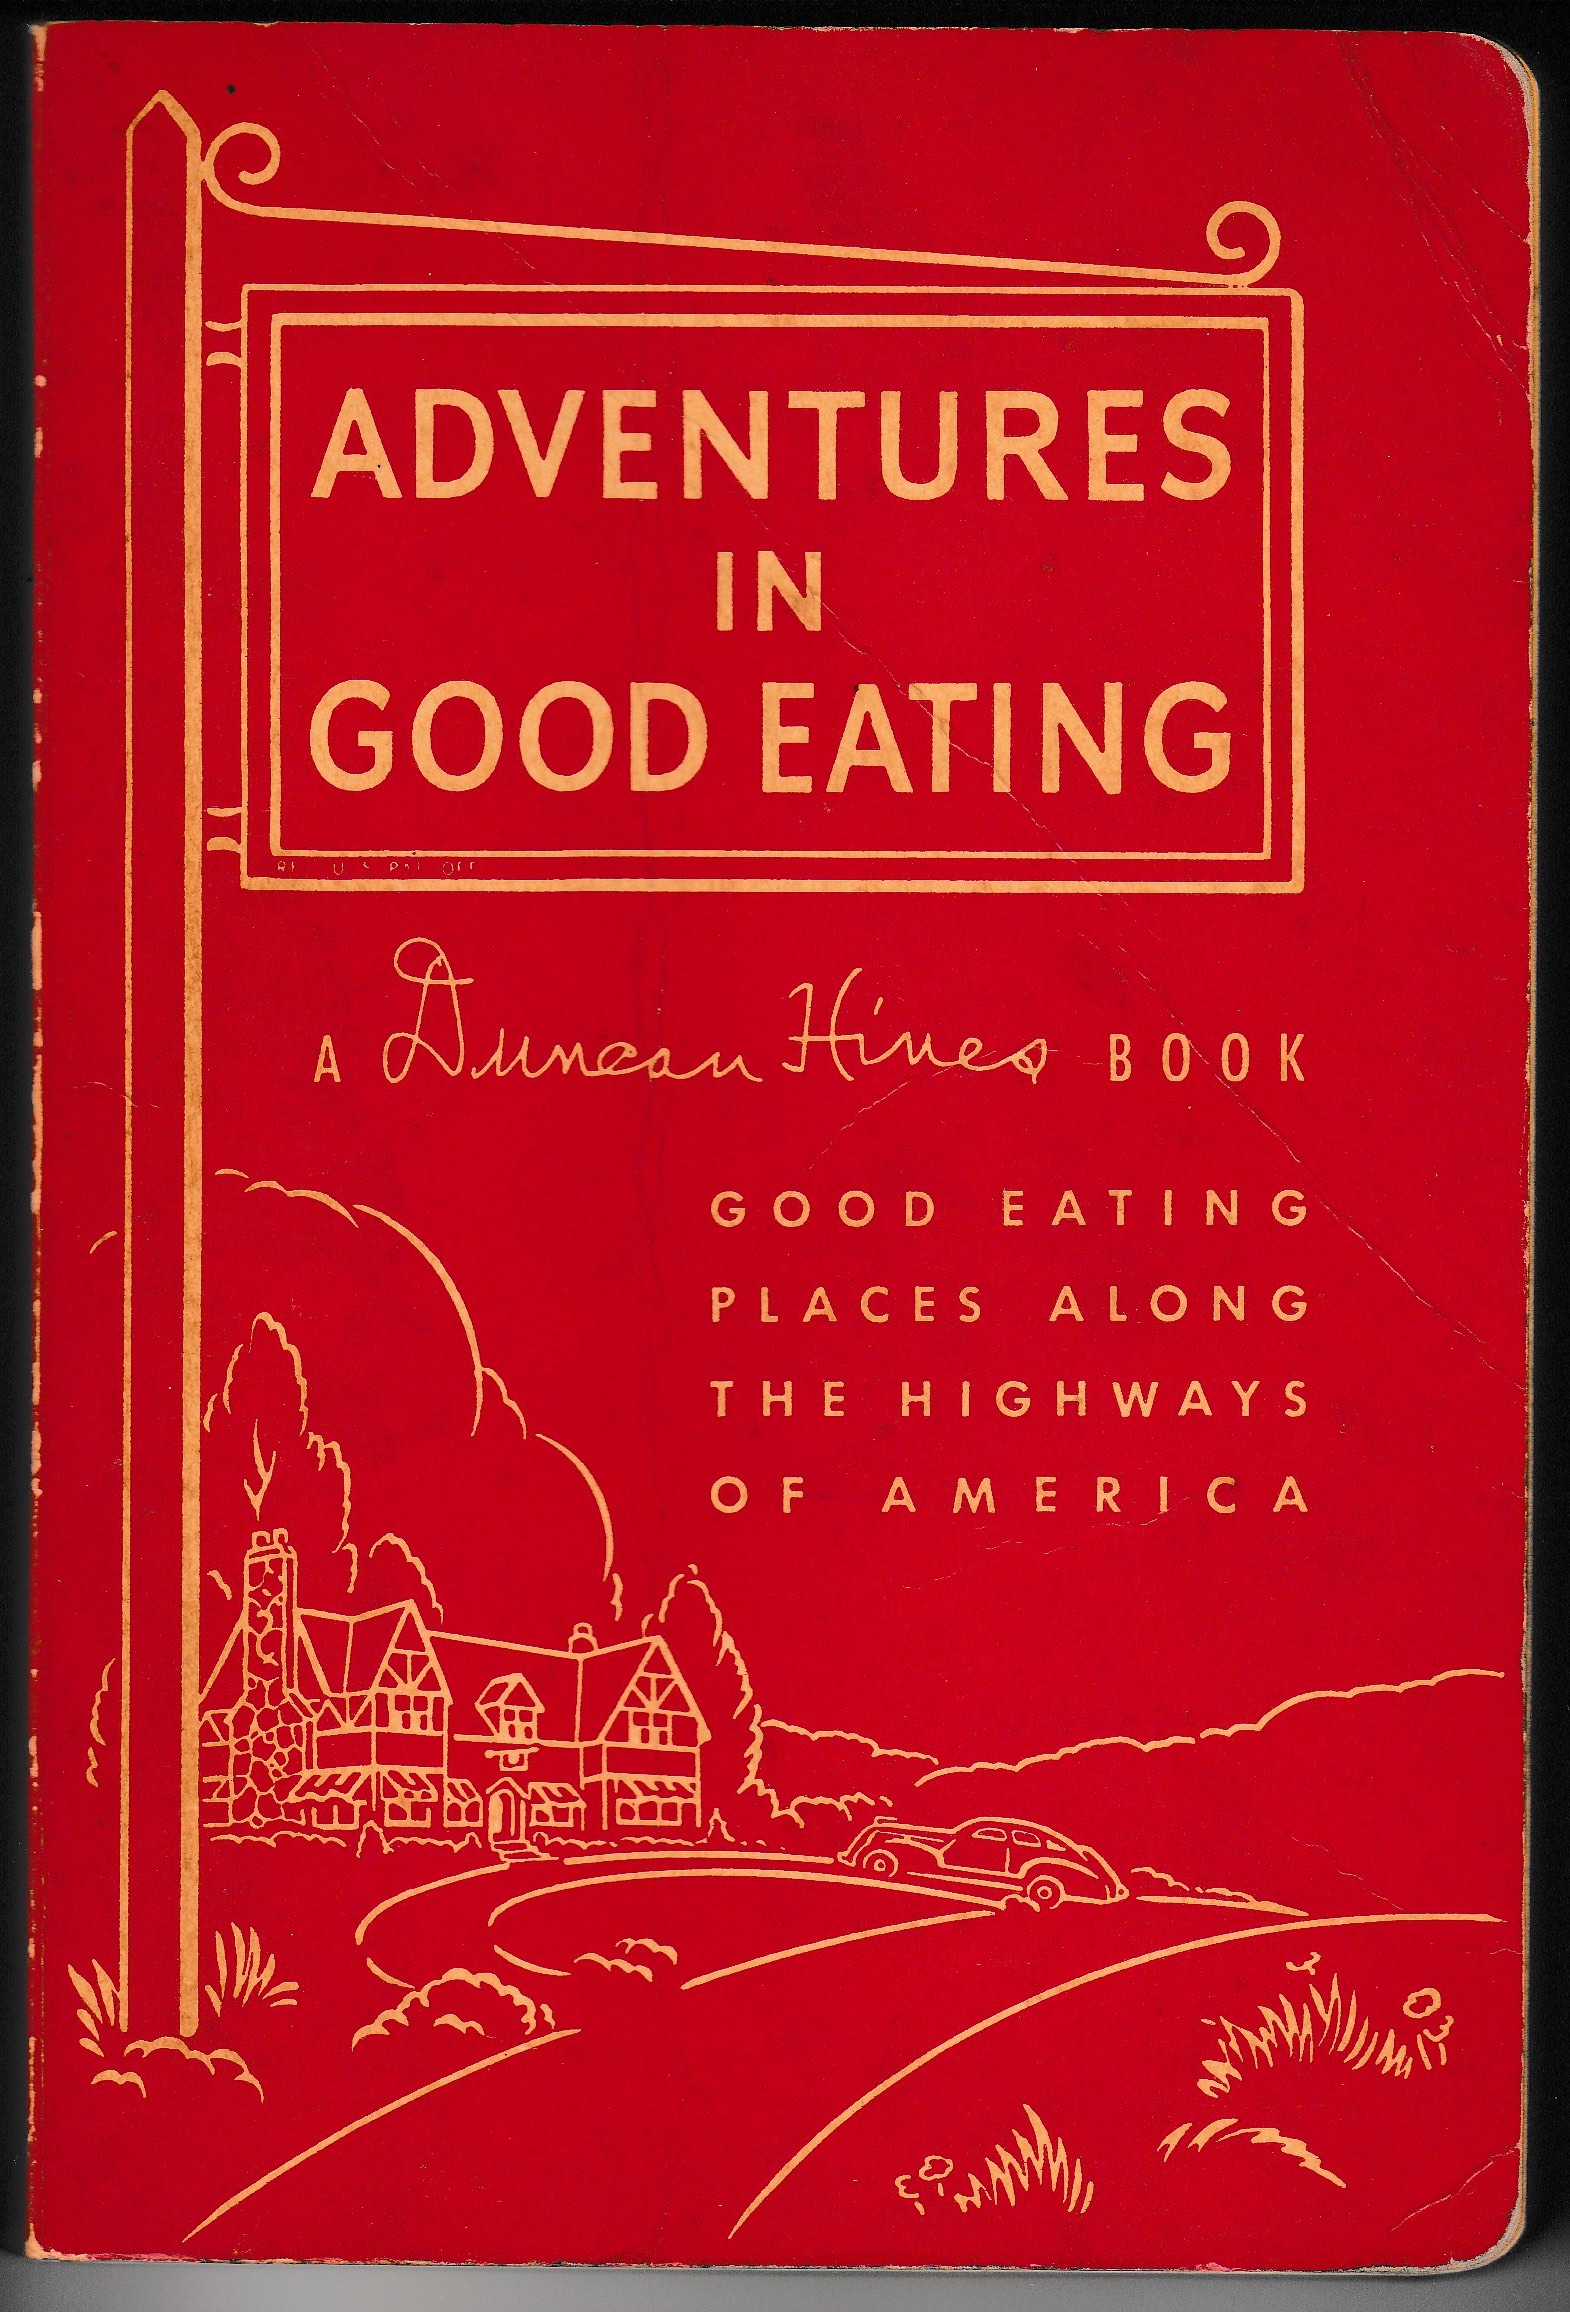 Adventures in Good Eating by Duncan Hines